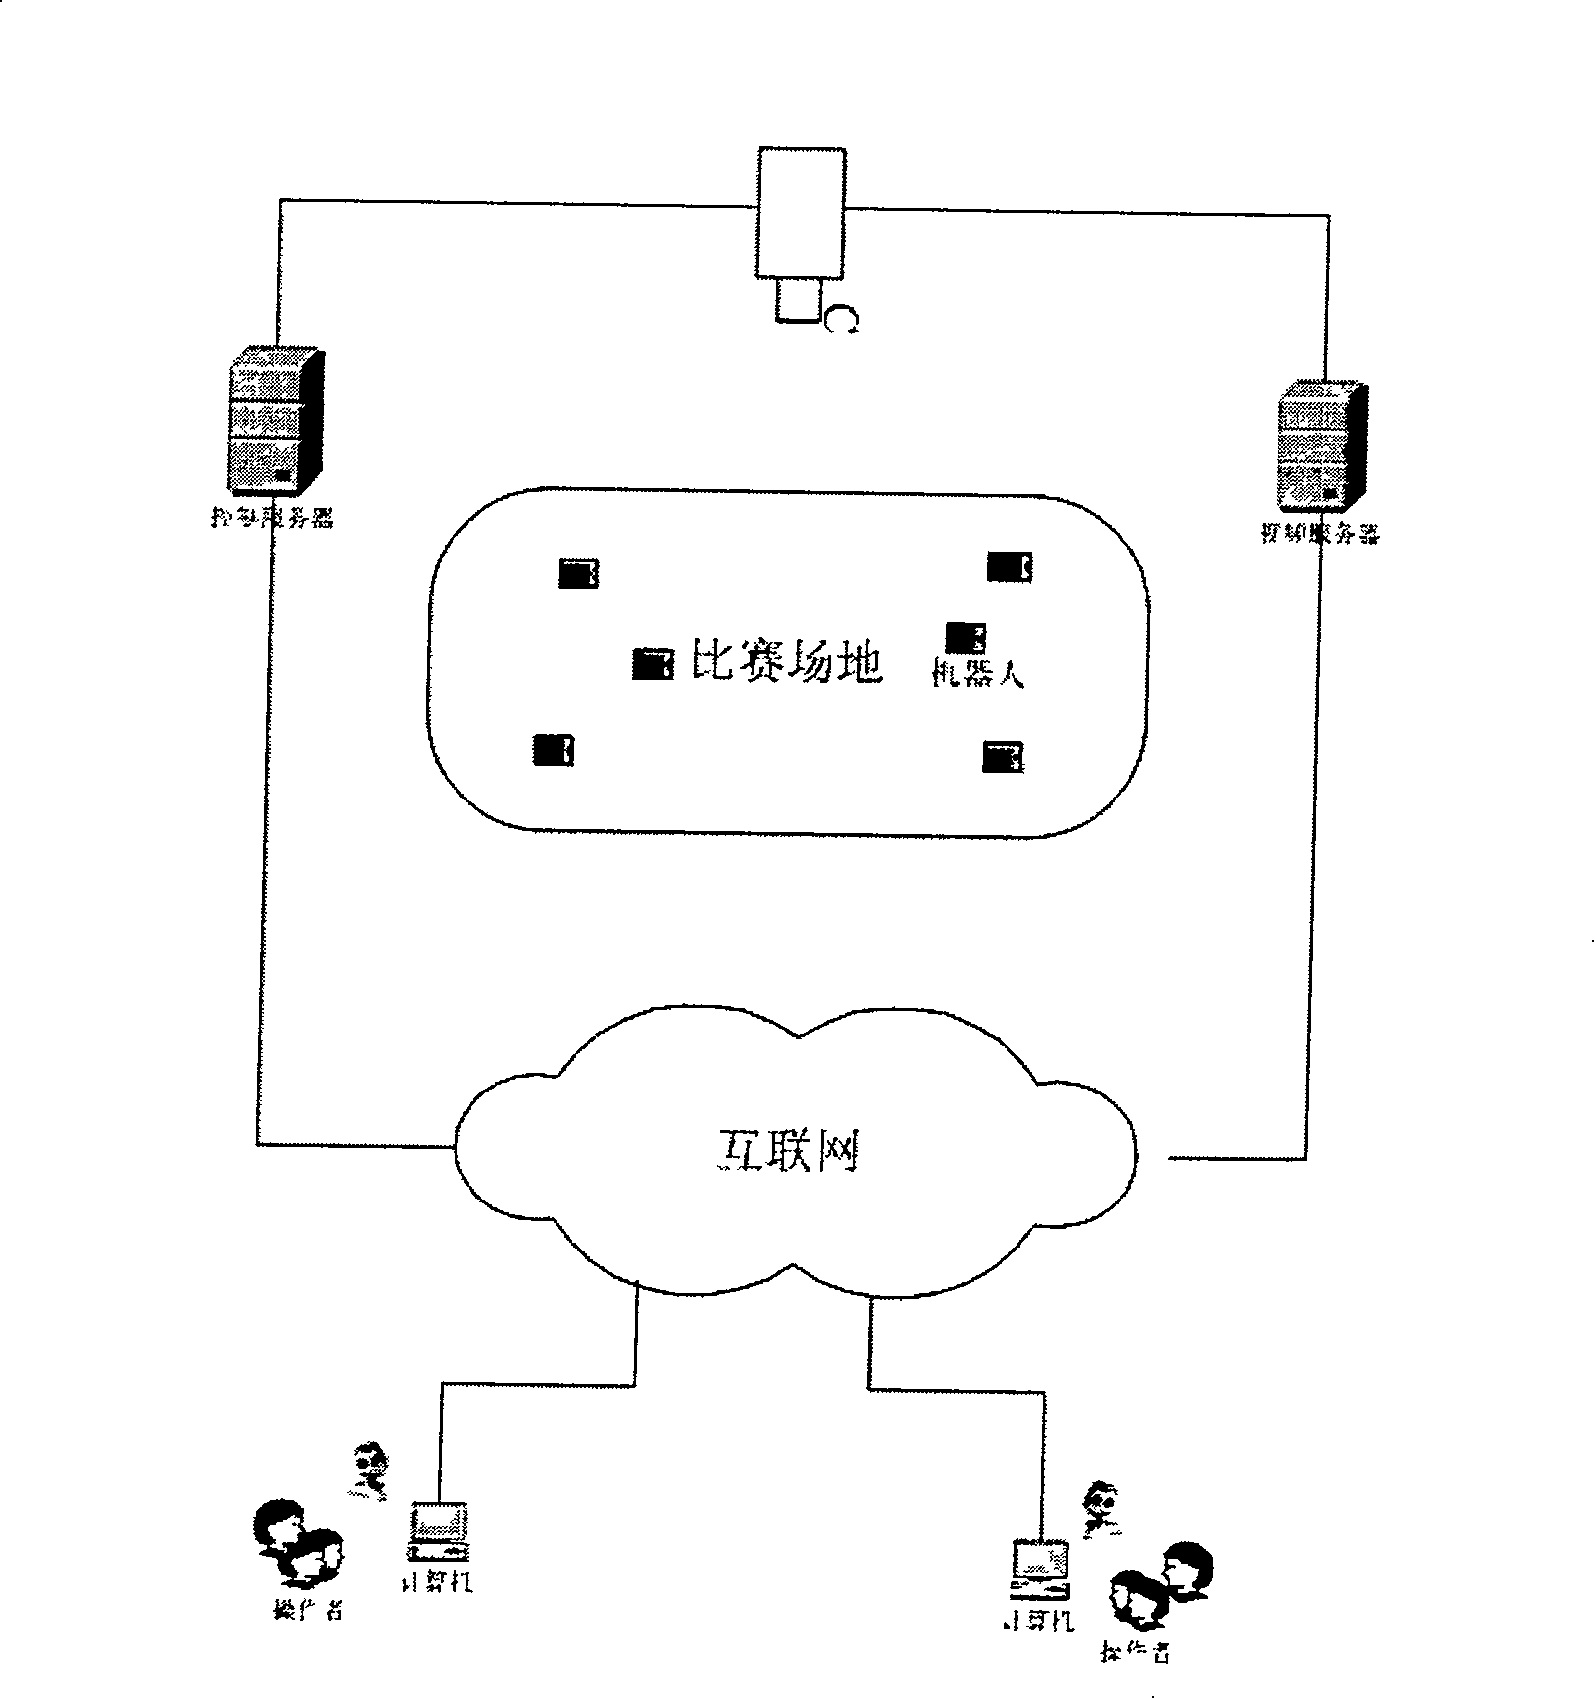 Method for operating robot football game remotely based on internet